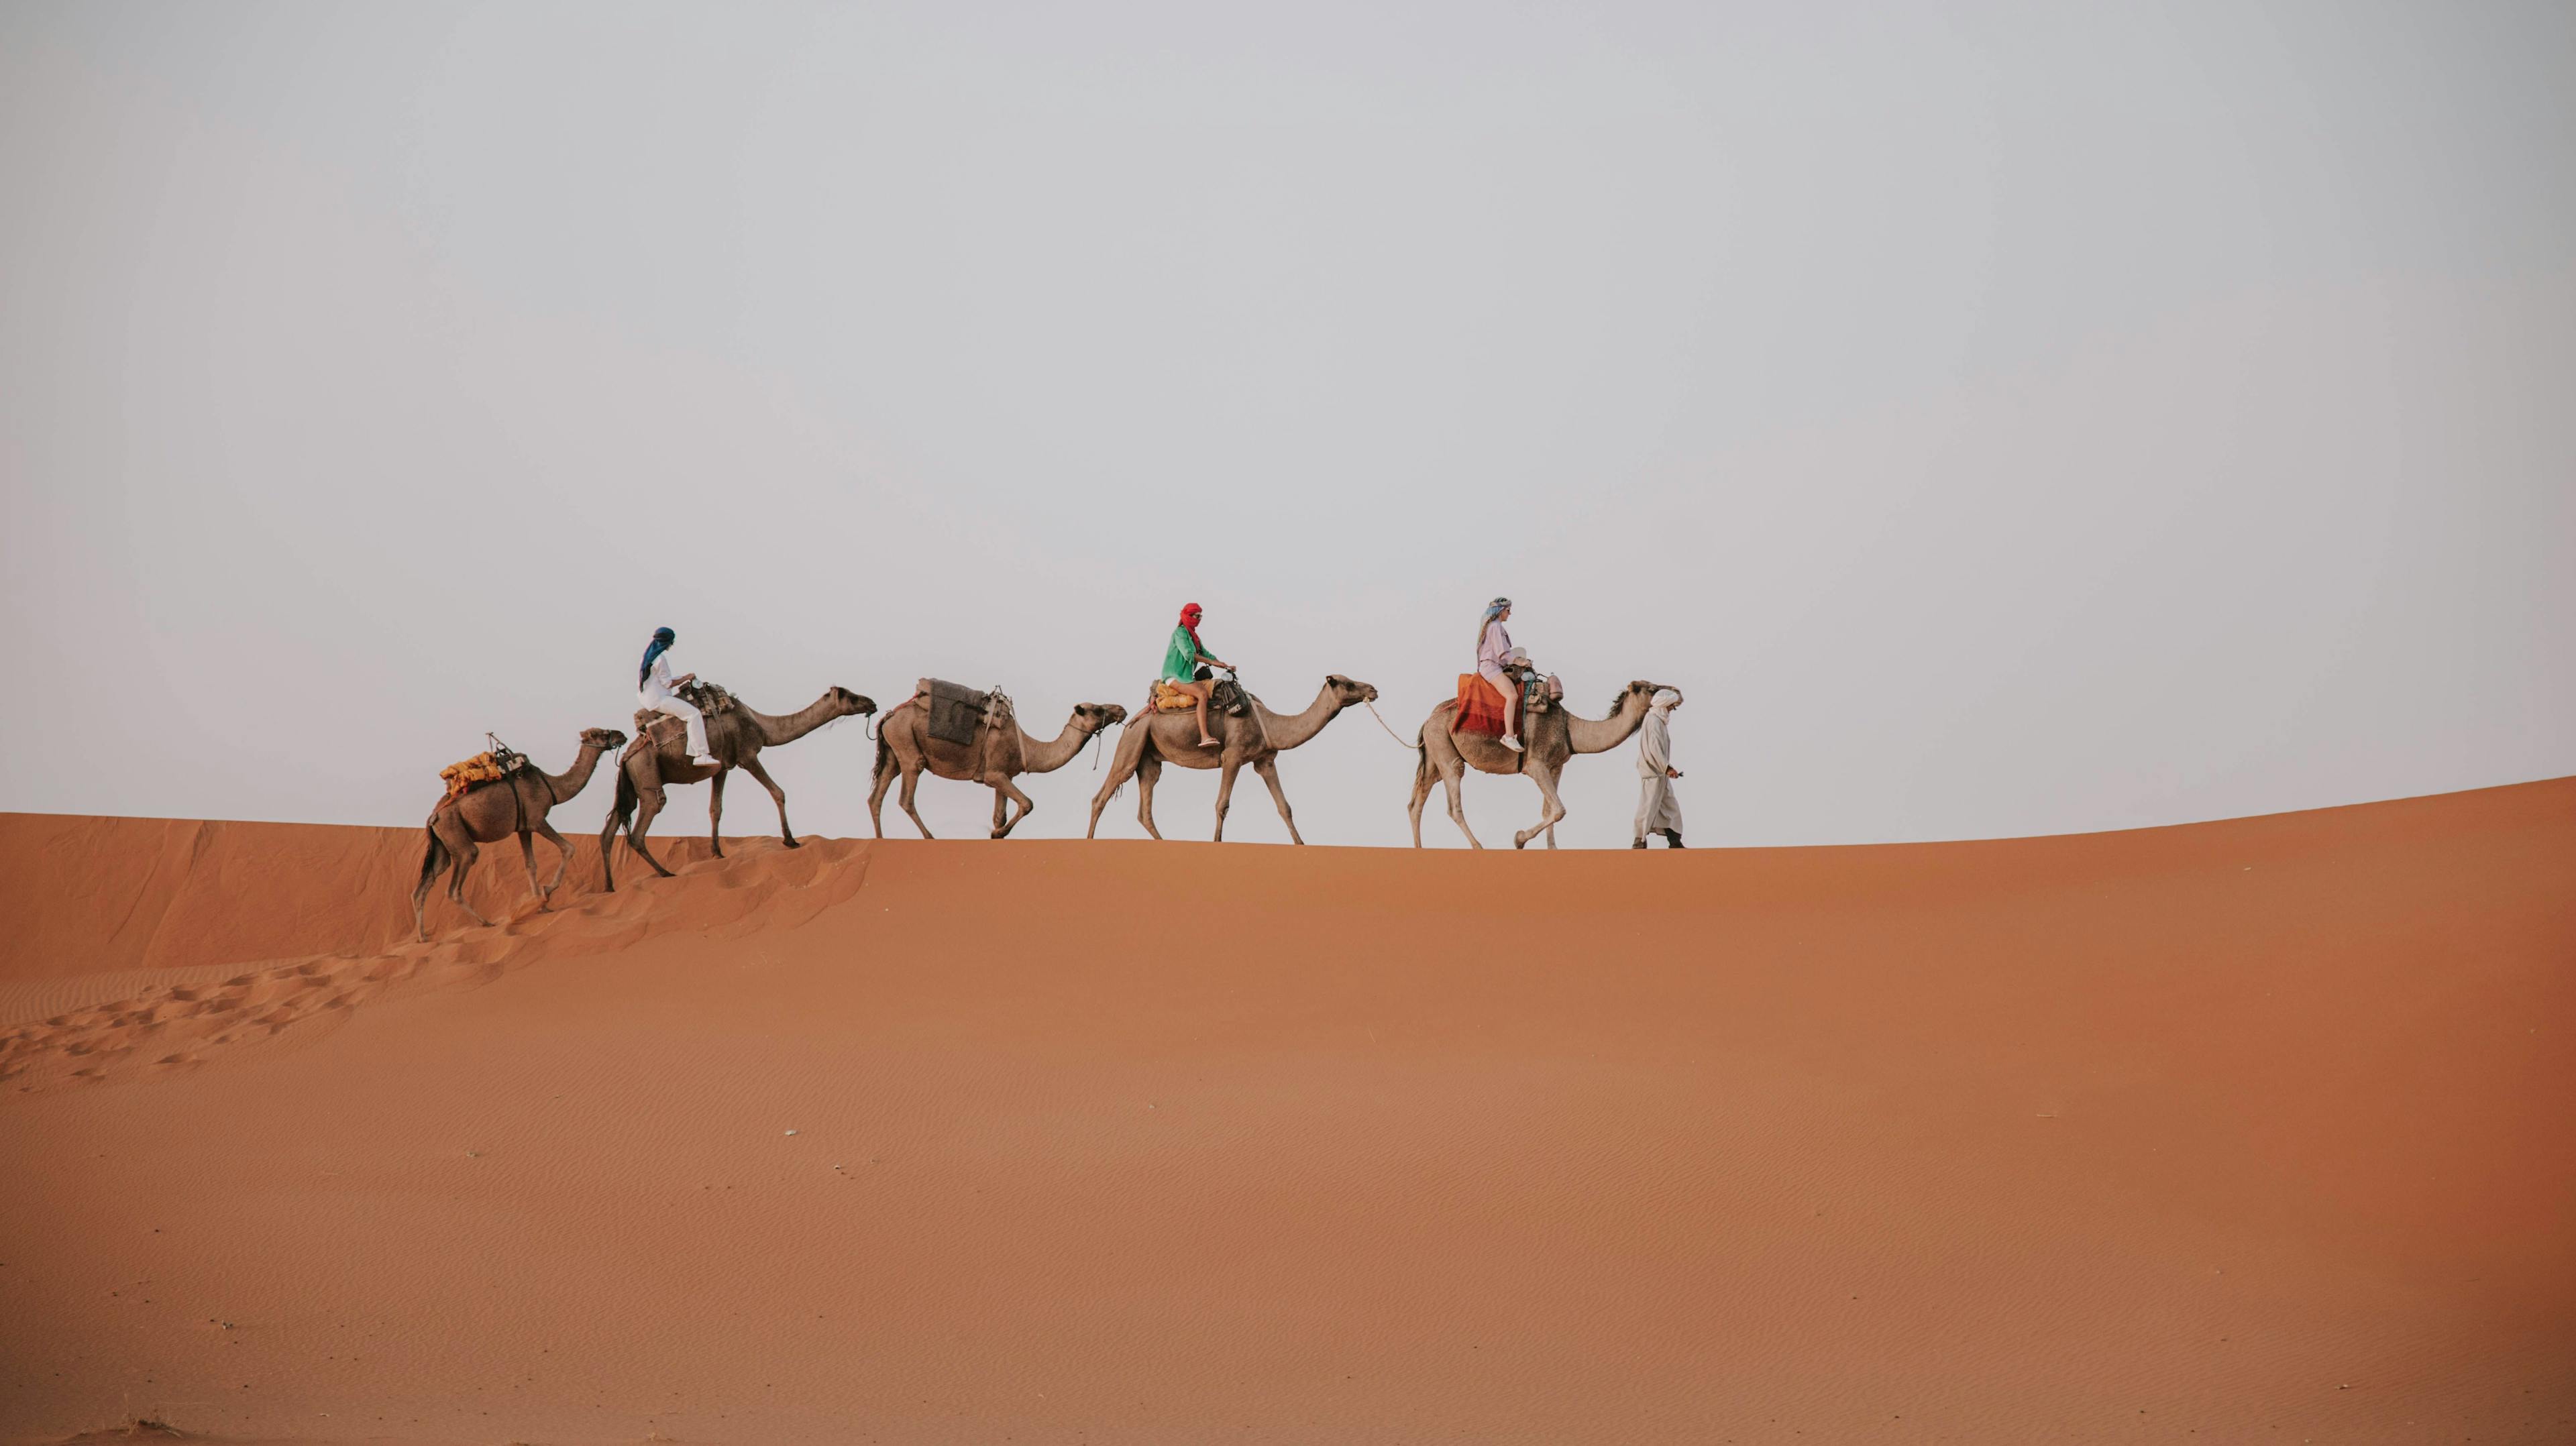 Discover the Merzouga Desert on a 3-Day, 2-Night Adventure from Fes